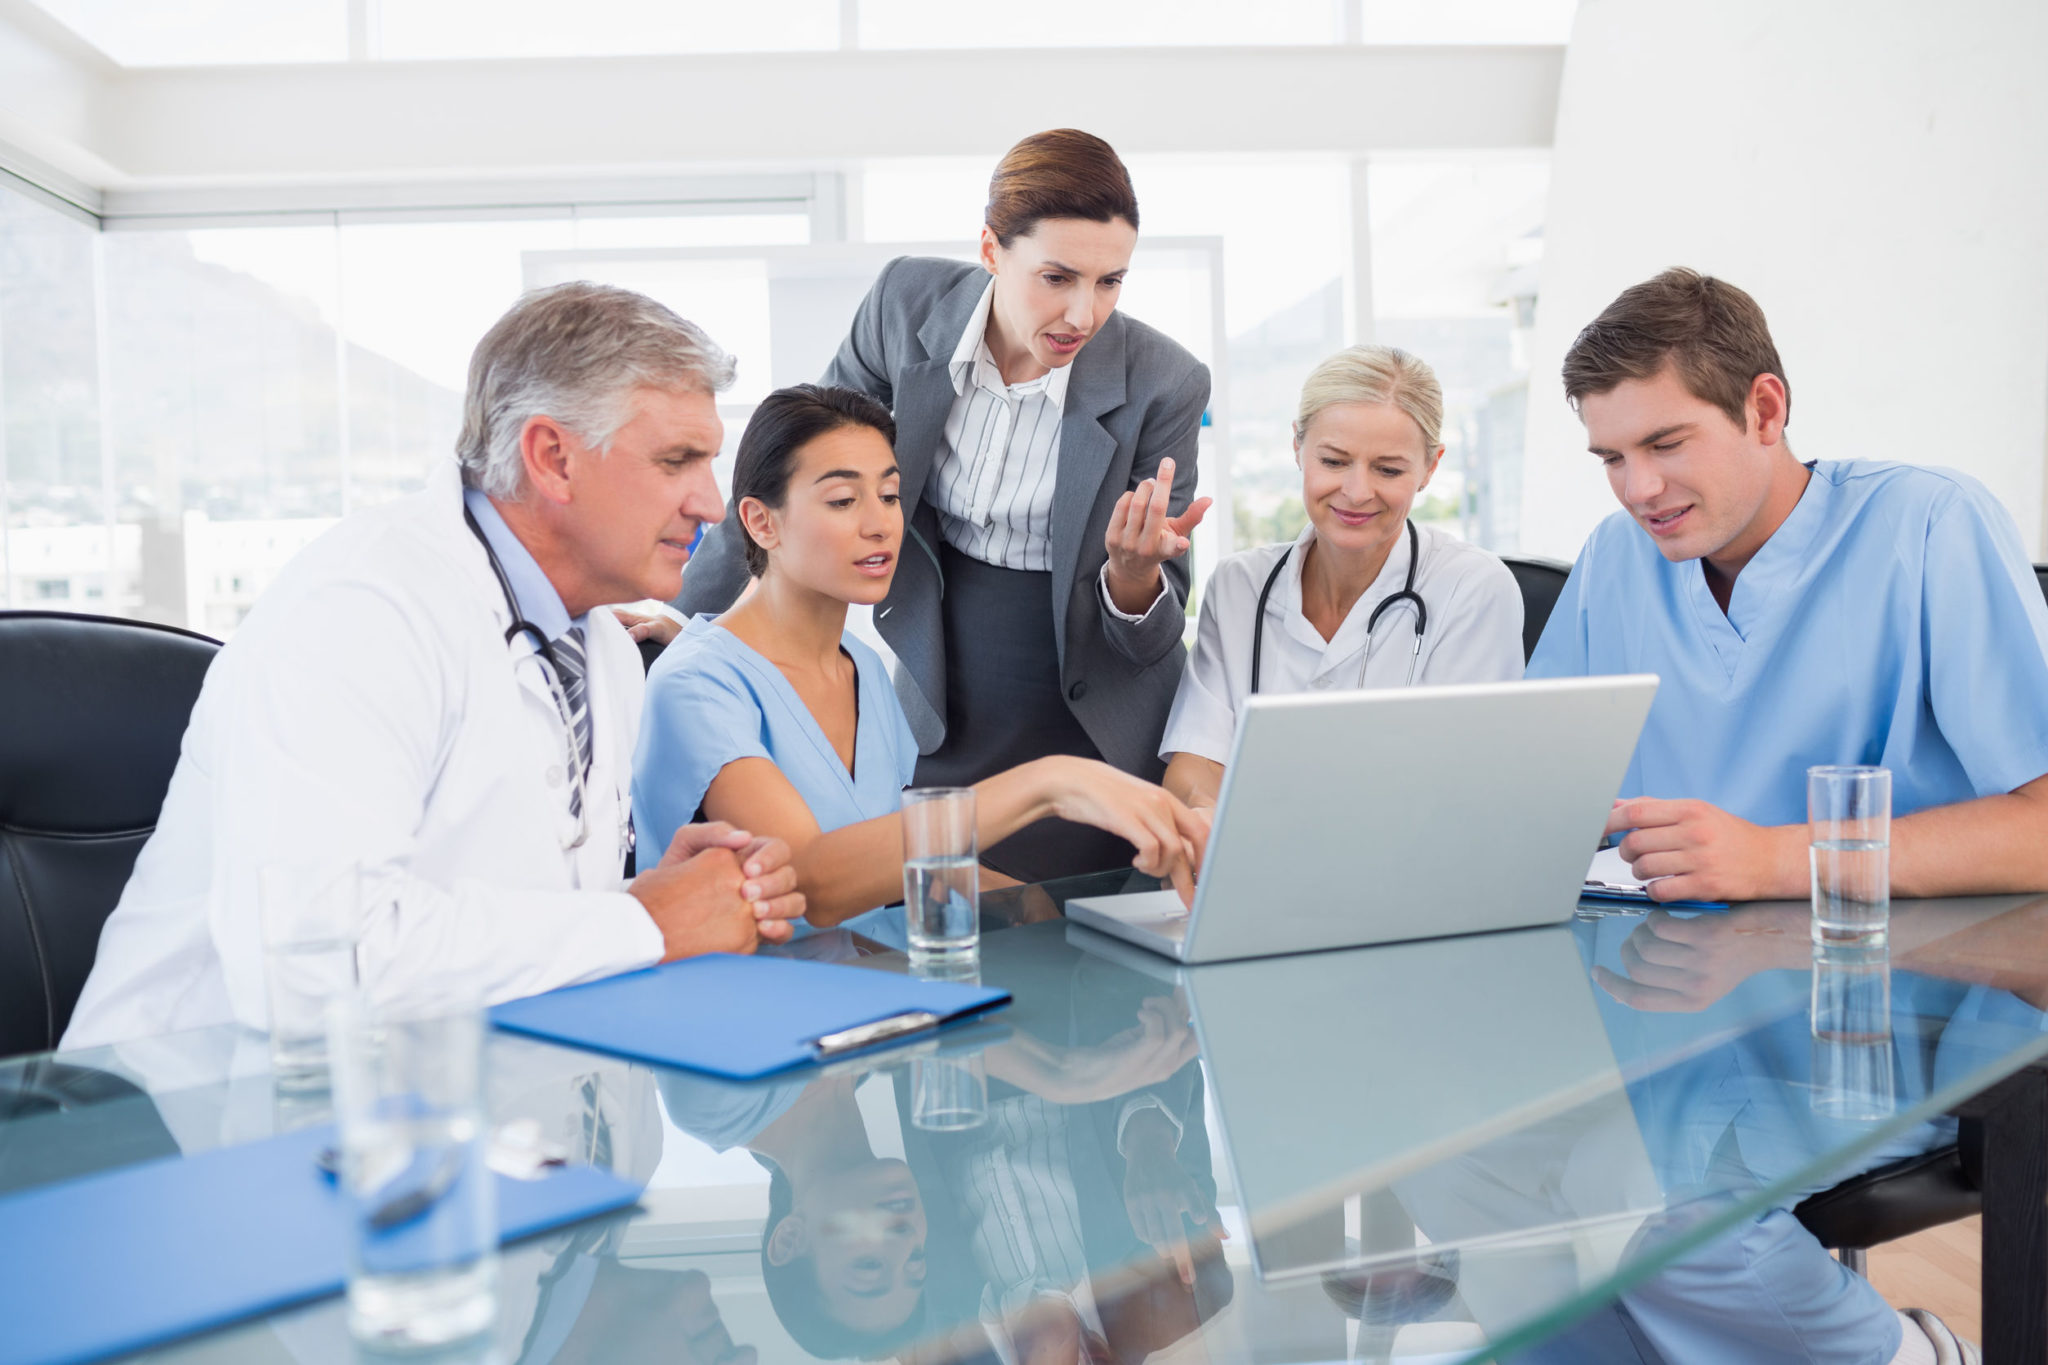 Case Study: Developing Physician Leadership for an Employed Physician Network